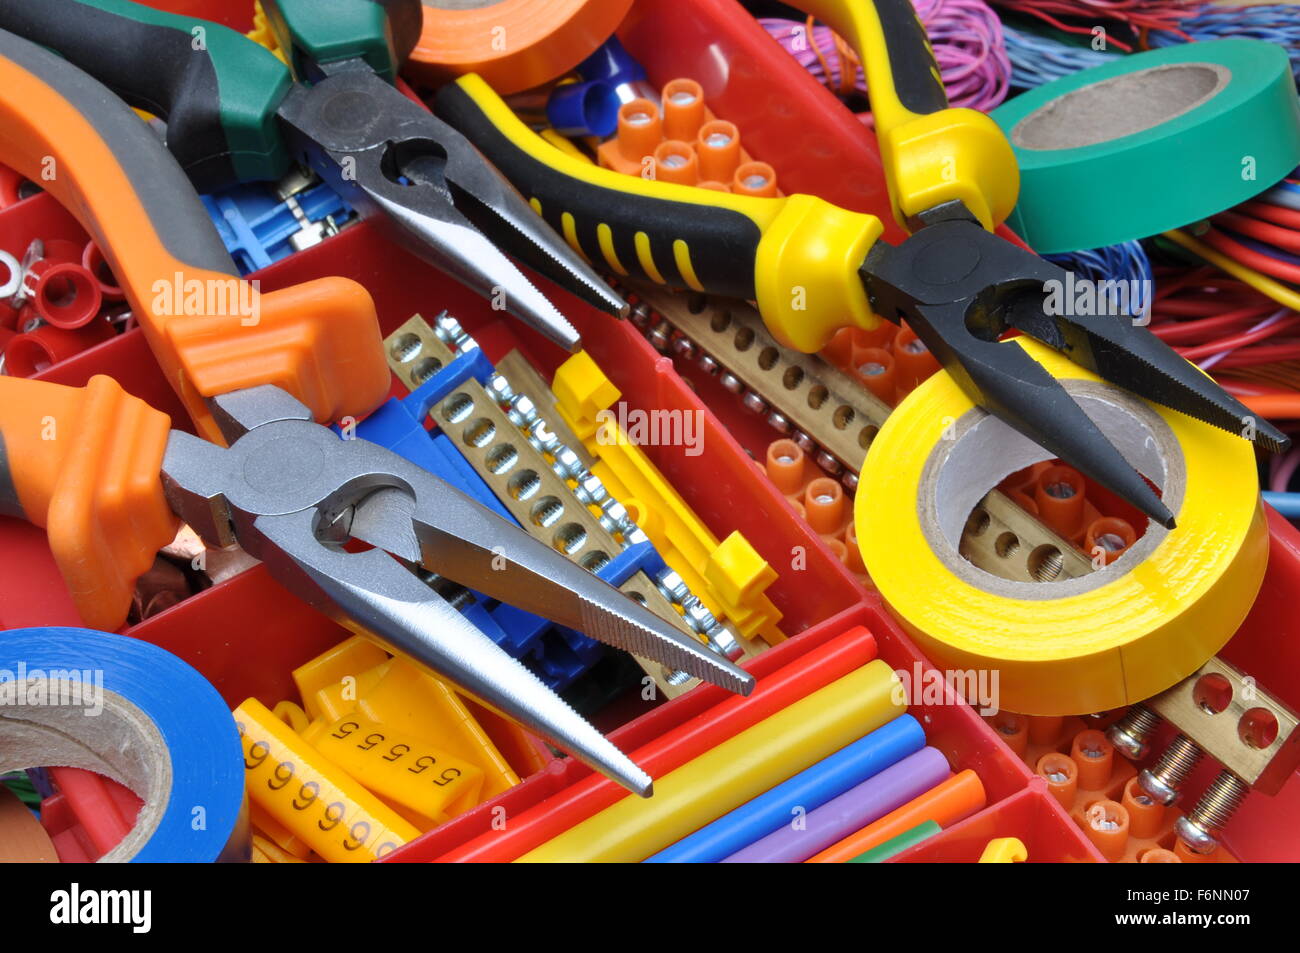 Tool box with electrical tools and components Stock Photo - Alamy